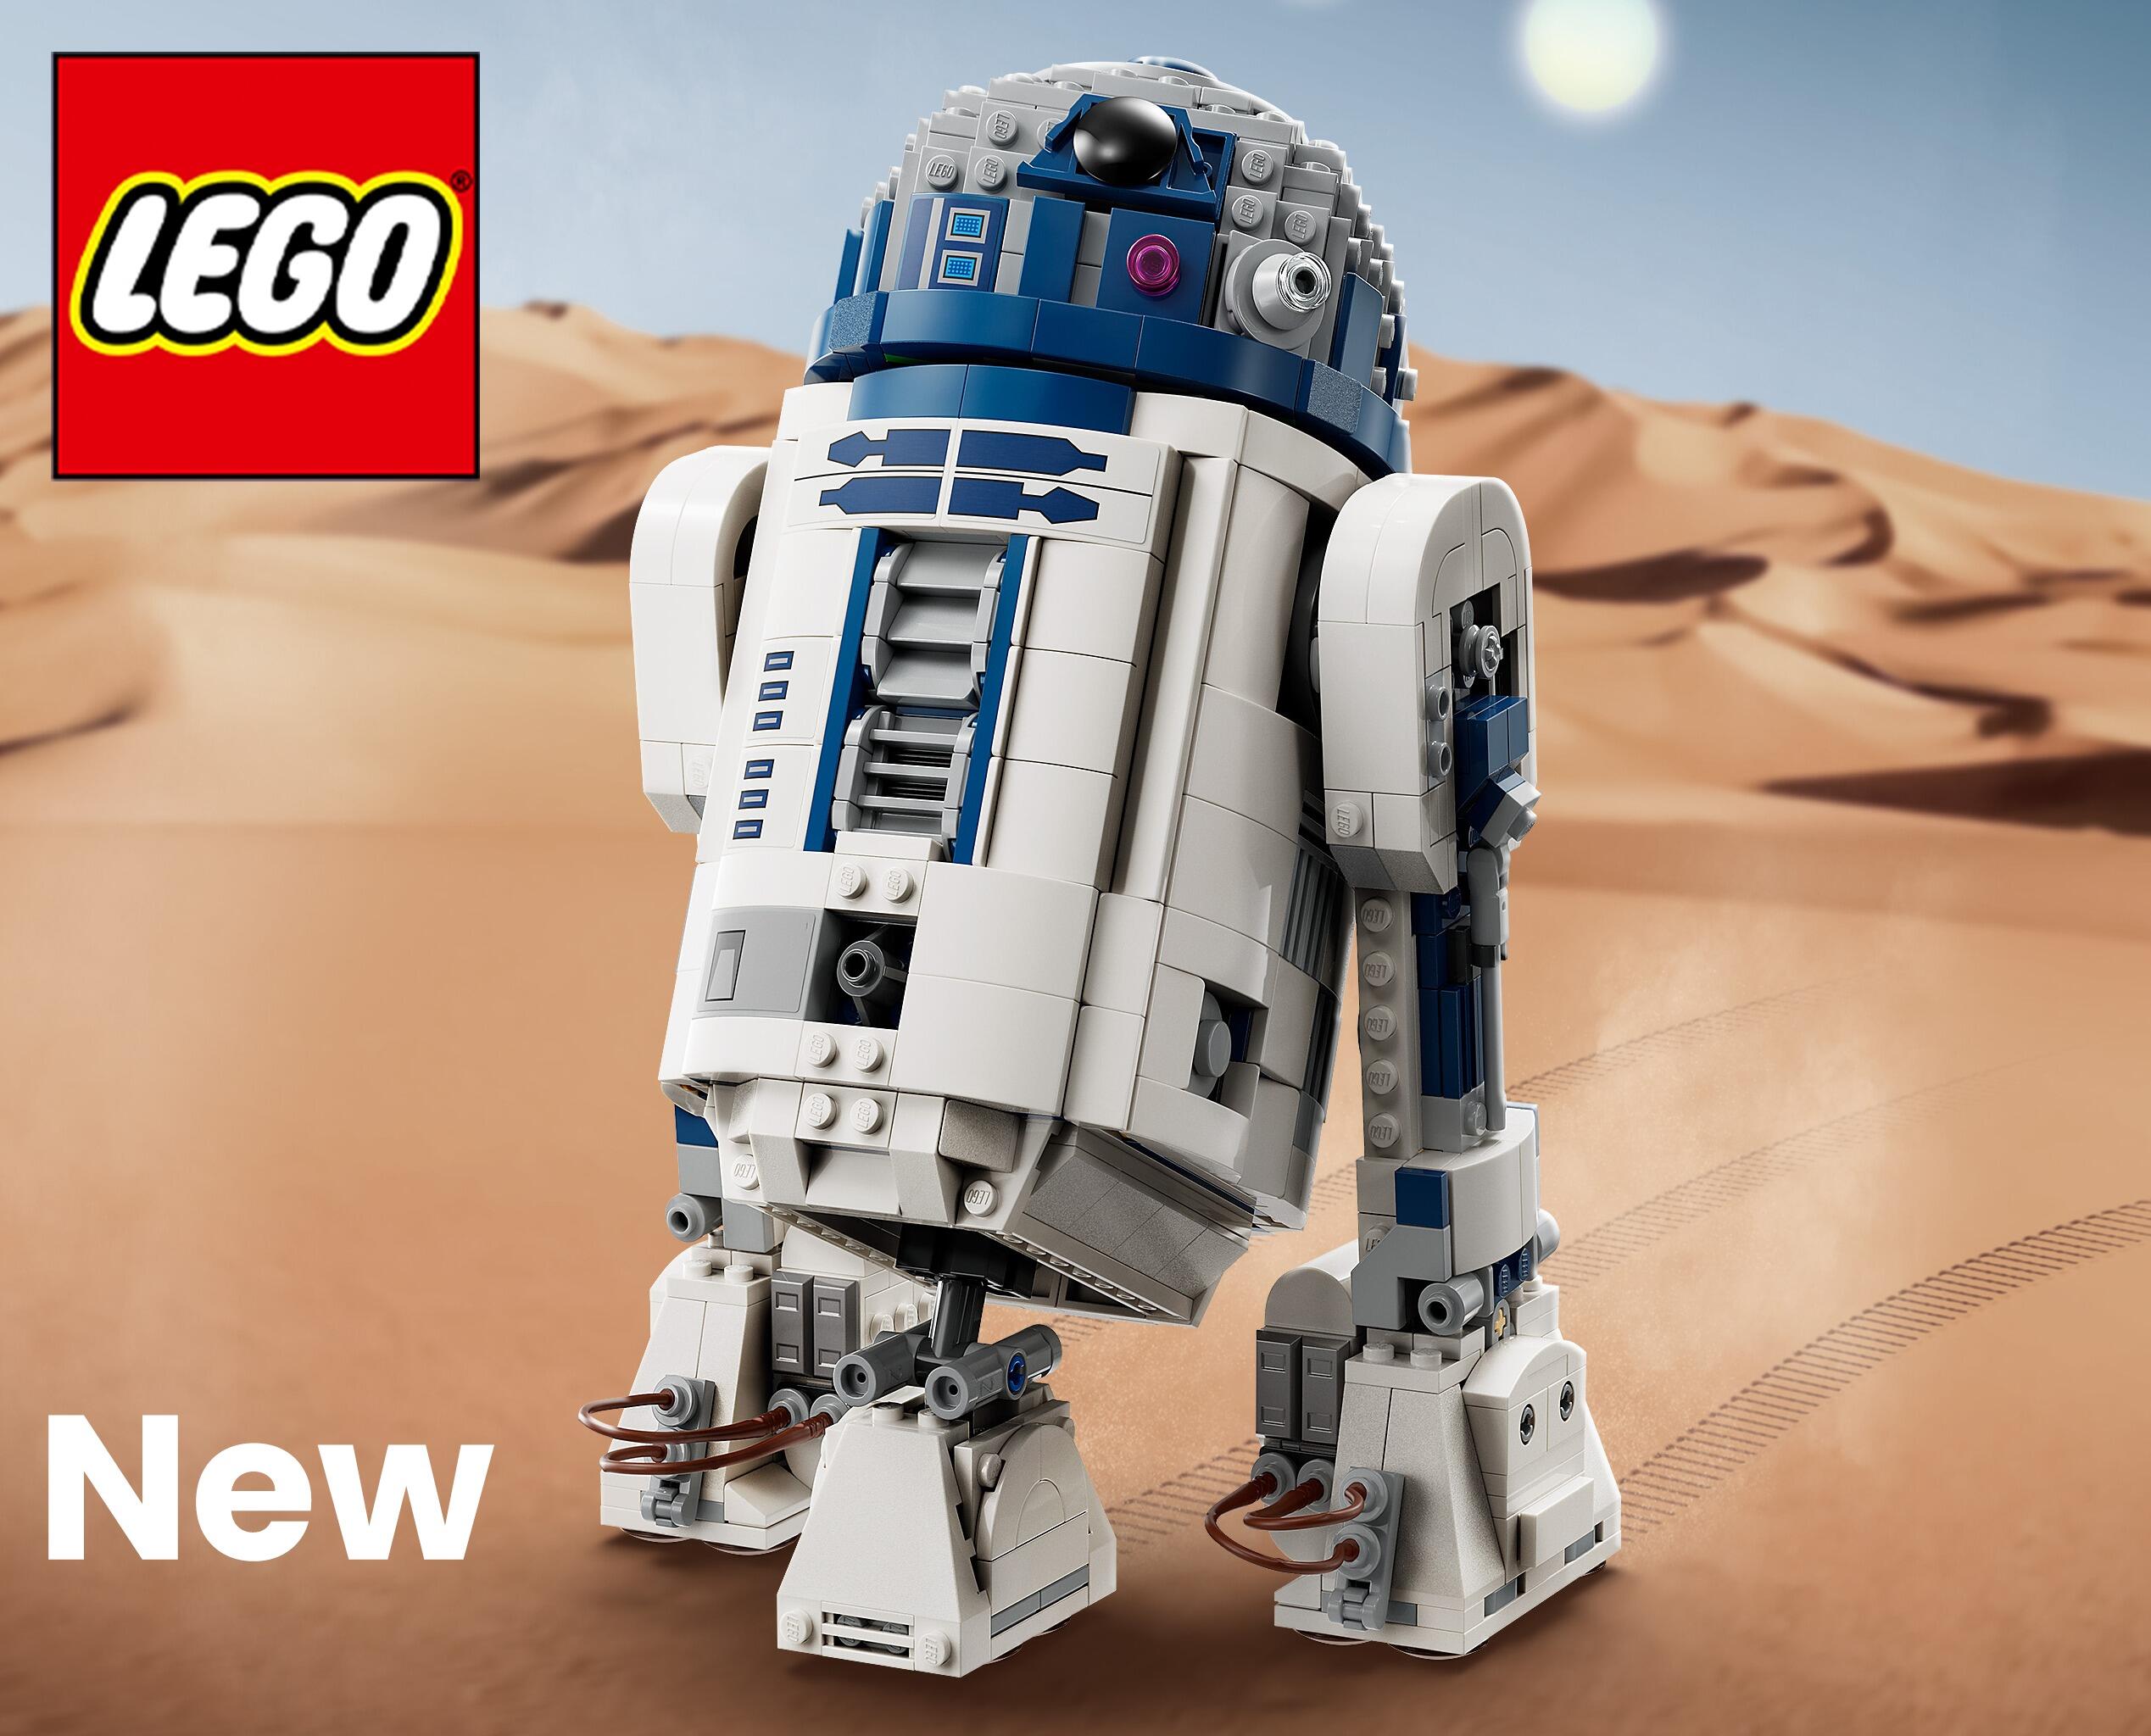 LEGO NEW|Discover the new range of products from LEGO launched on 1st March 2024. Animal Crossing, Harry Potter, Star Wars & Technic.